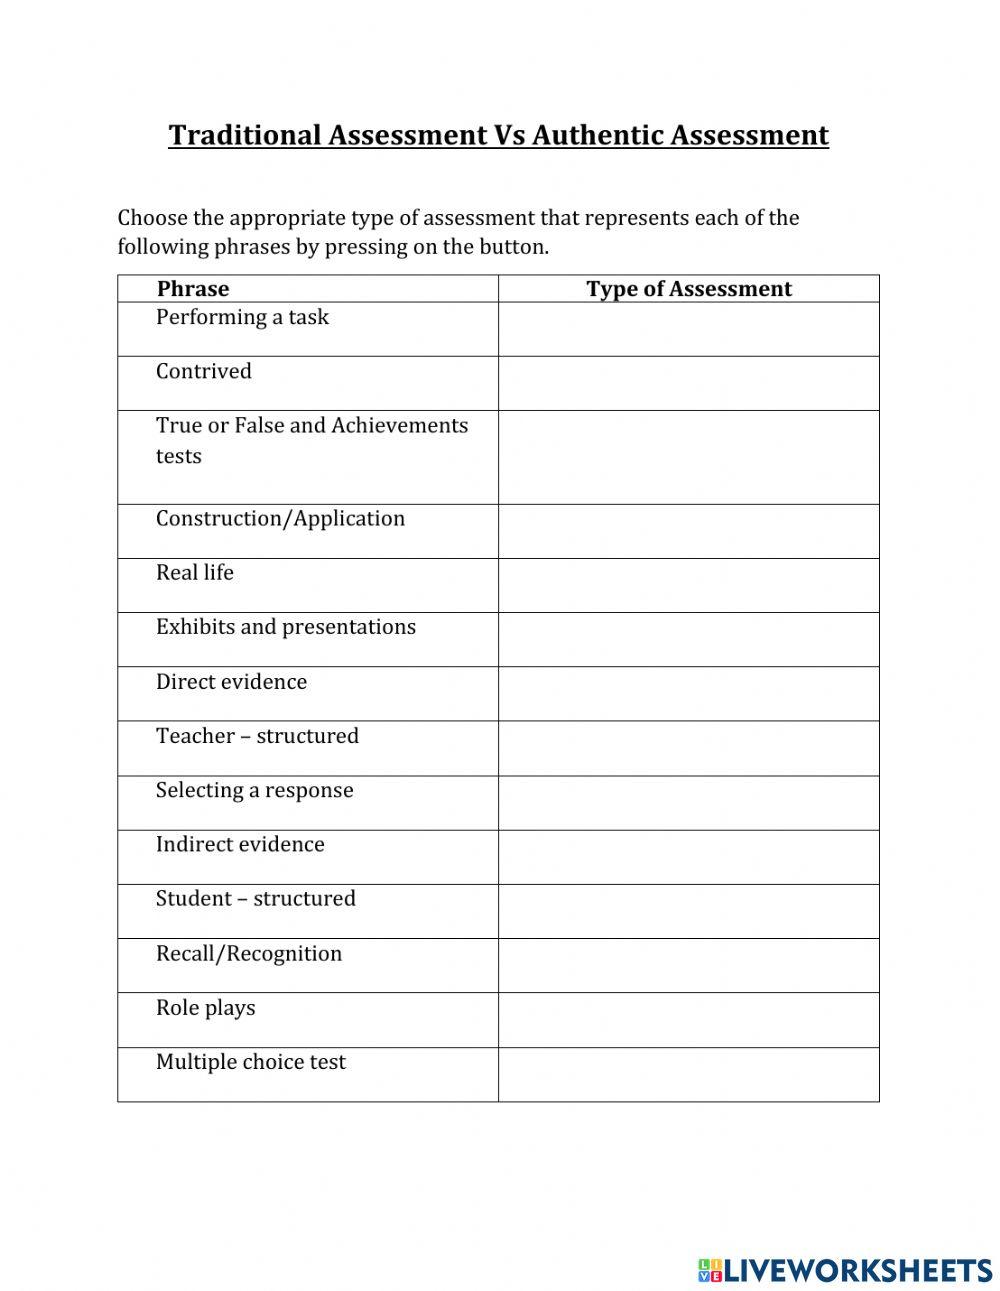 Authentic vs traditional assessments